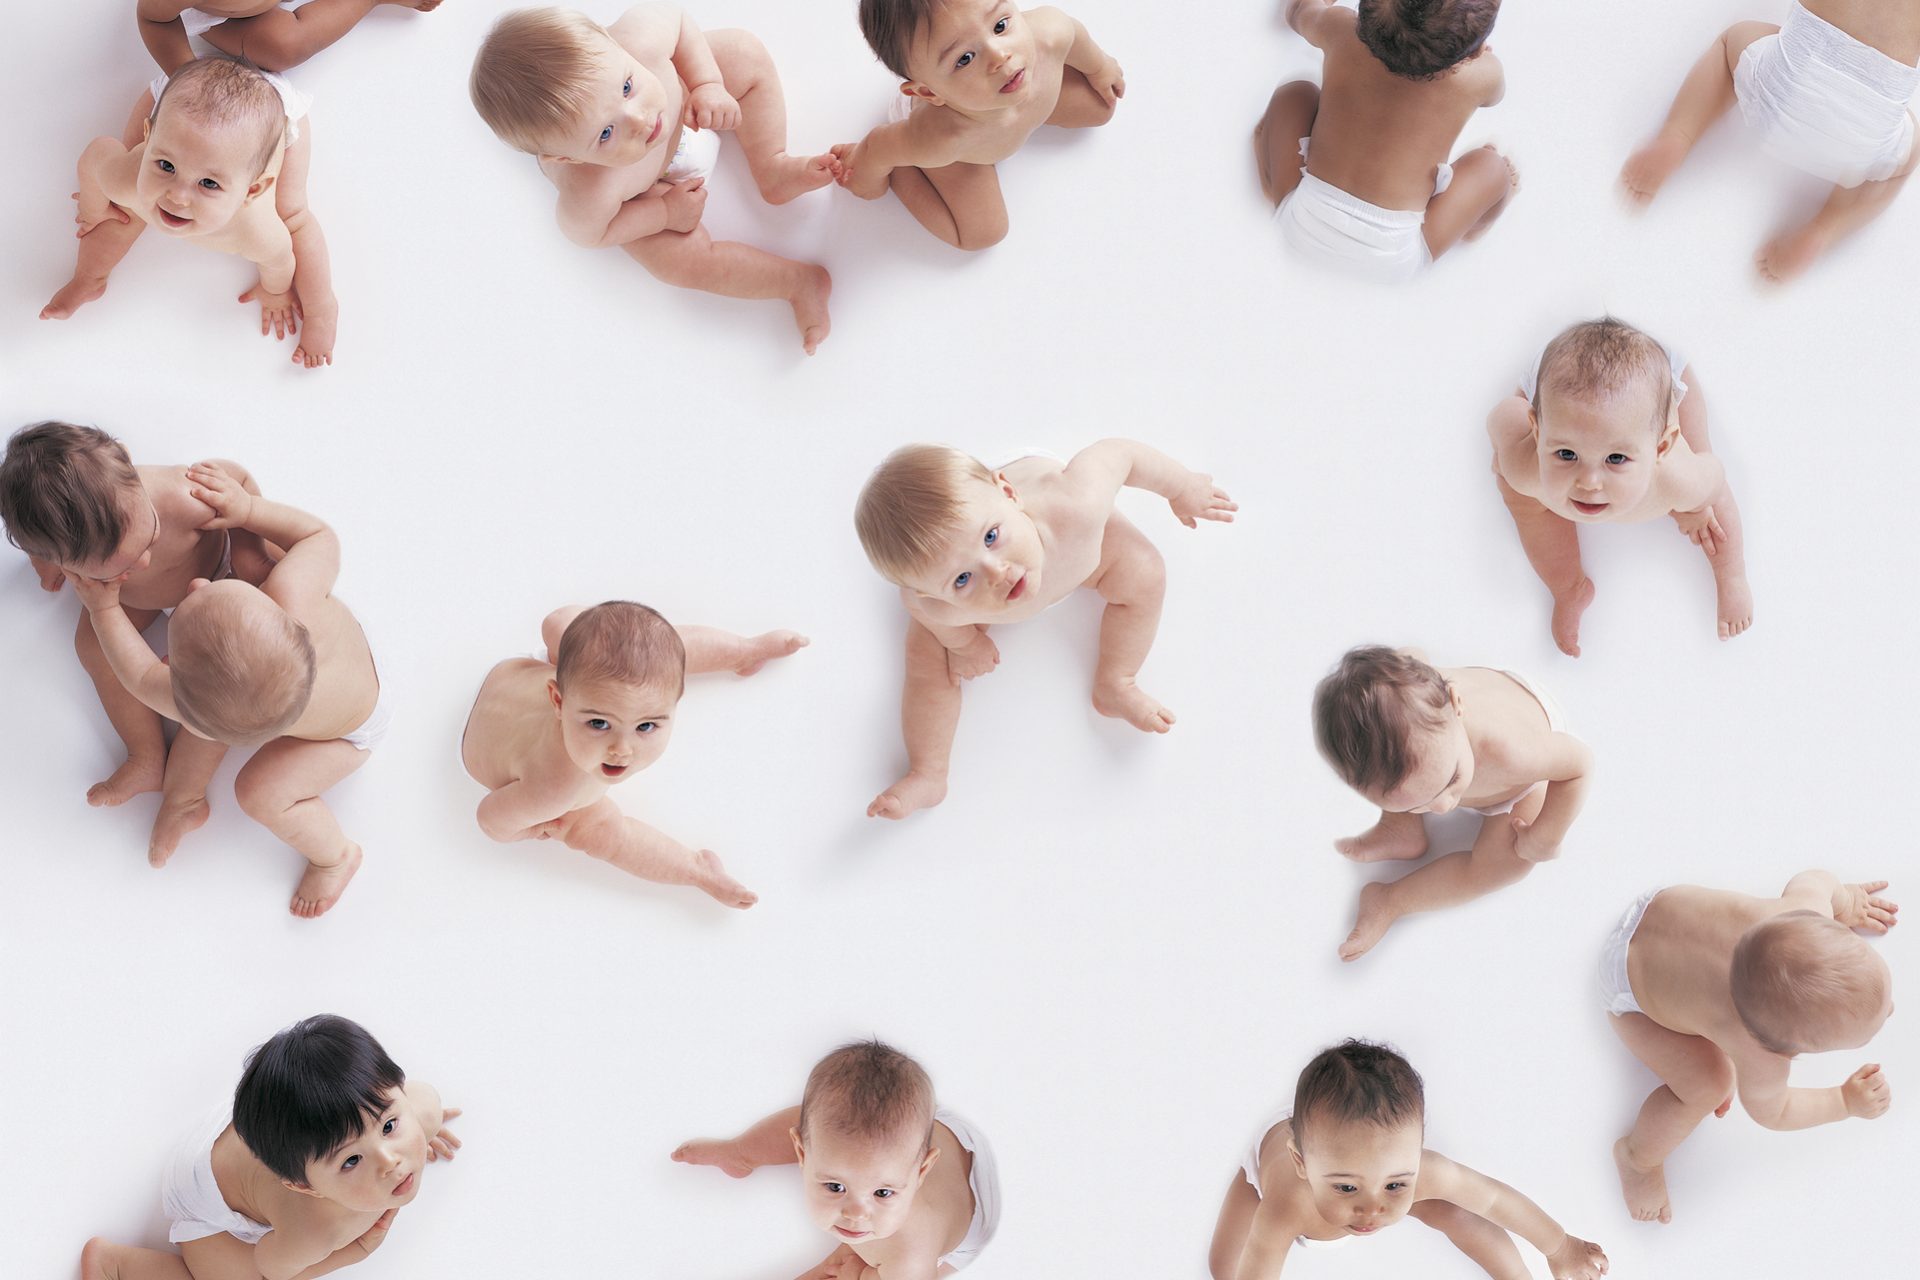 This genetics company can predict the health of future babies